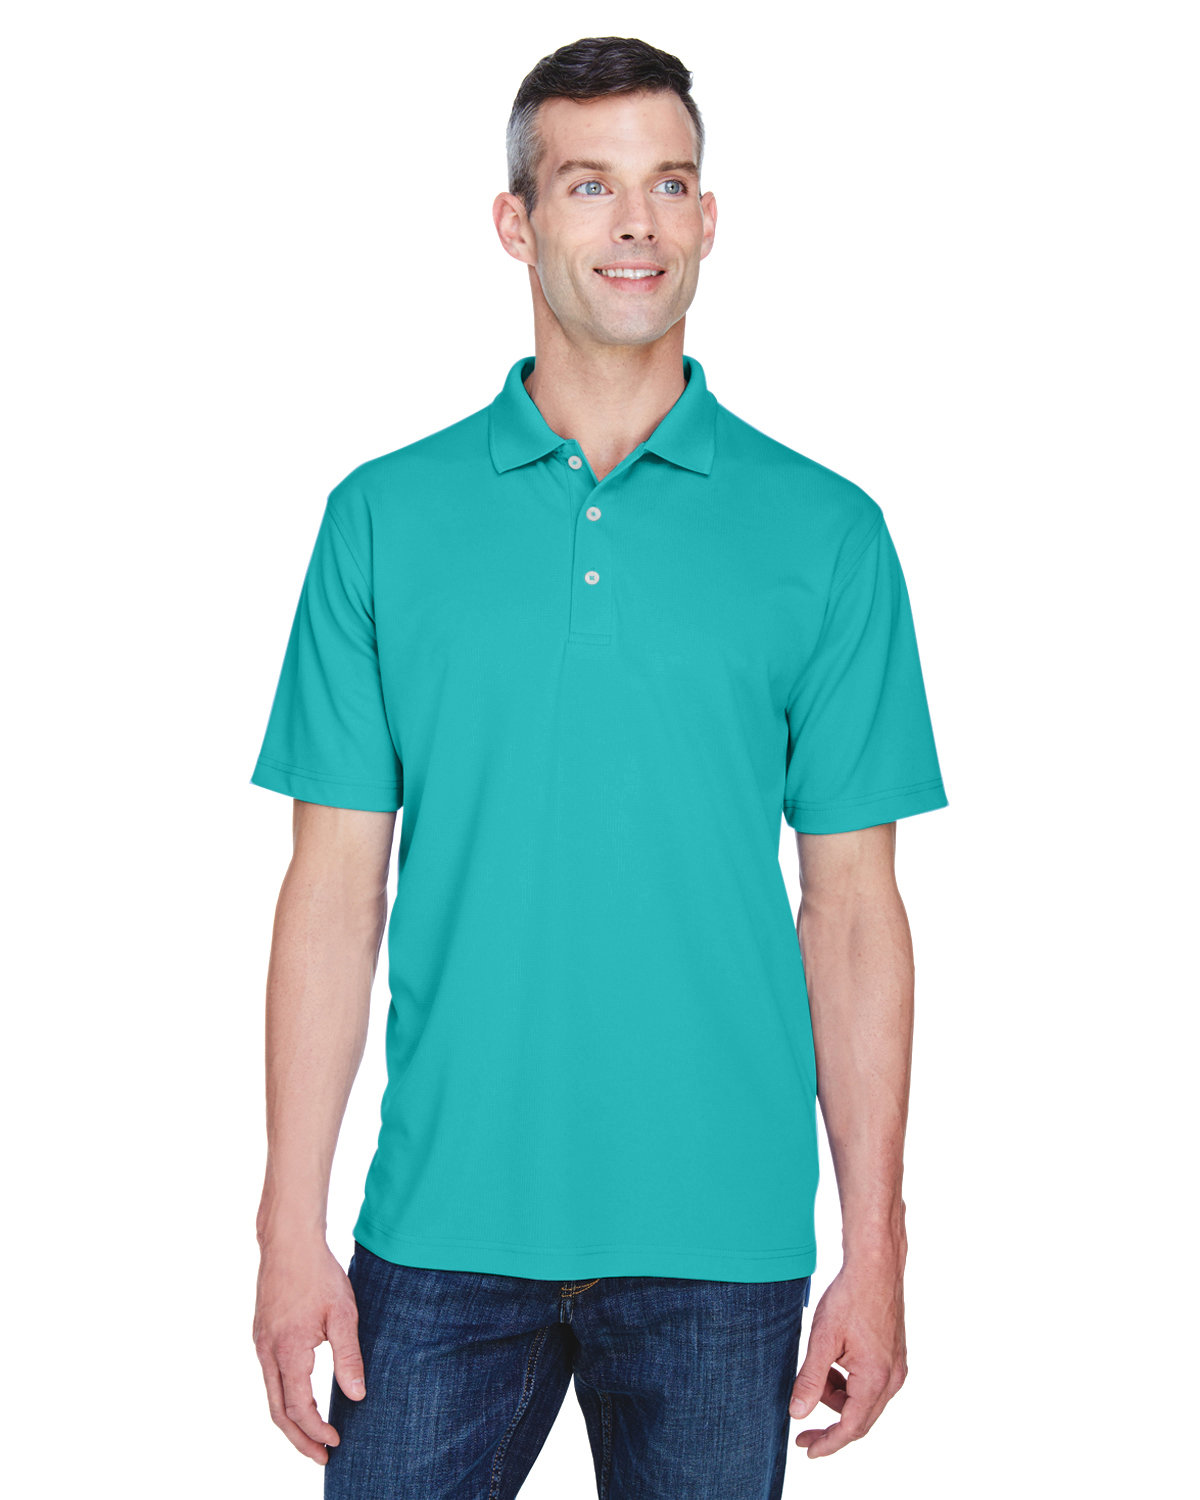 UltraClub Men's Cool & Dry Stain-Release Performance Polo | alphabroder